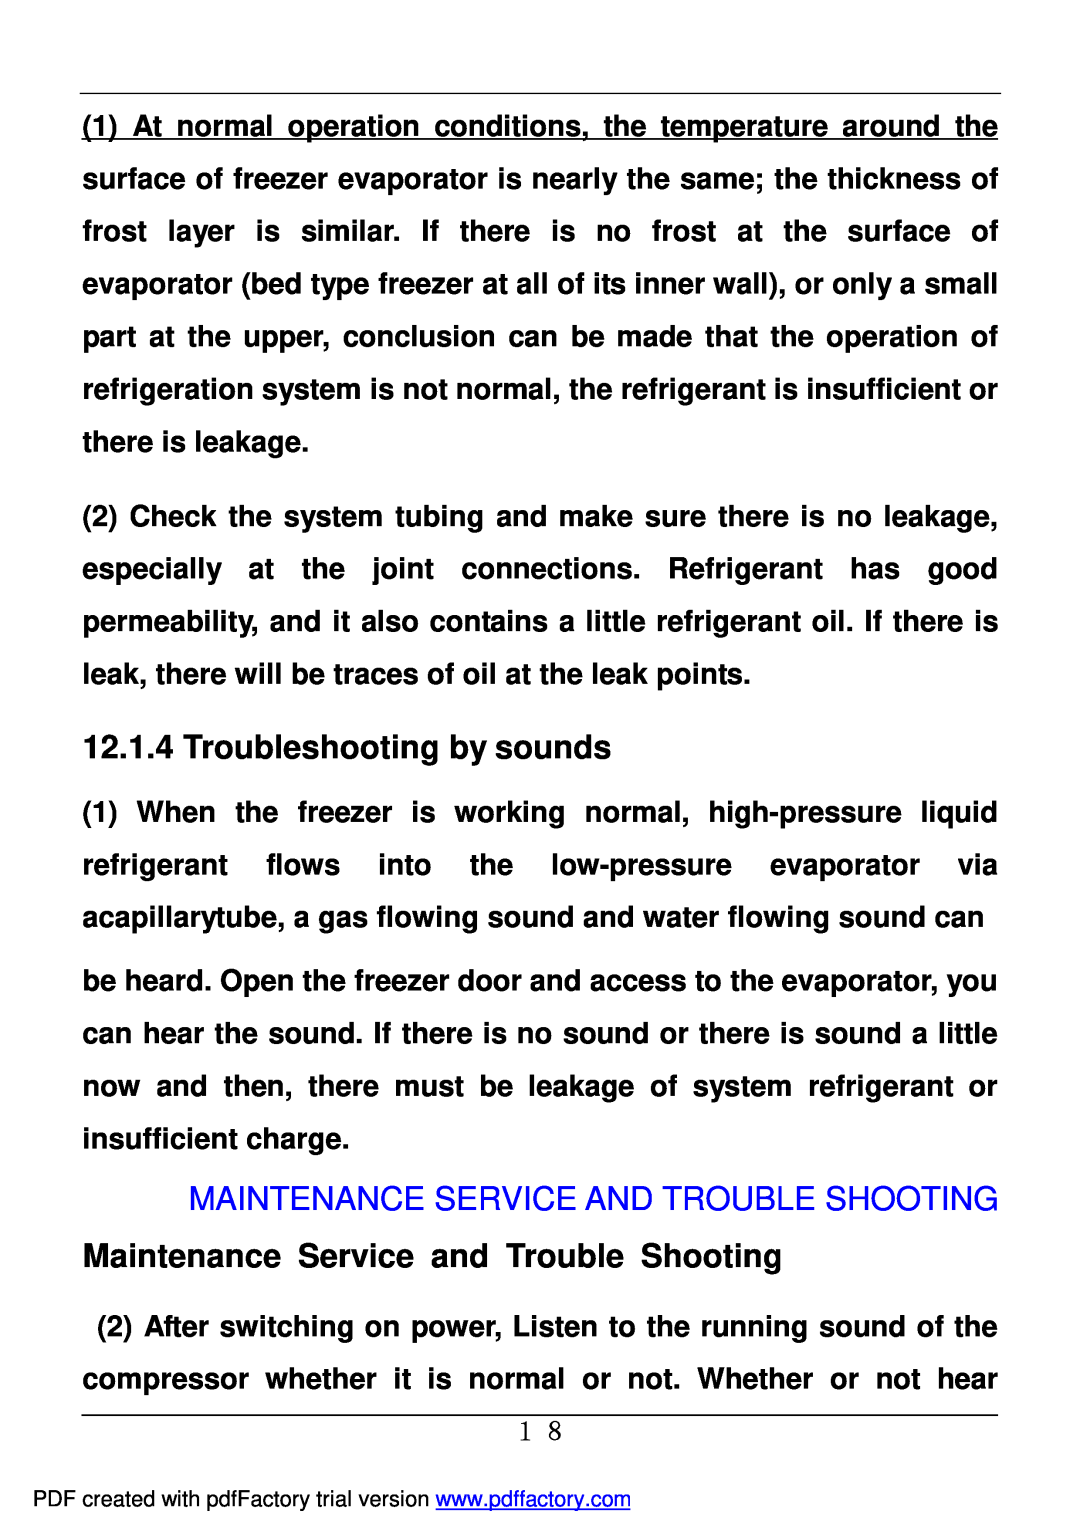 Haier BD-478A service manual Troubleshooting by sounds, Maintenance Service And Trouble Shooting 